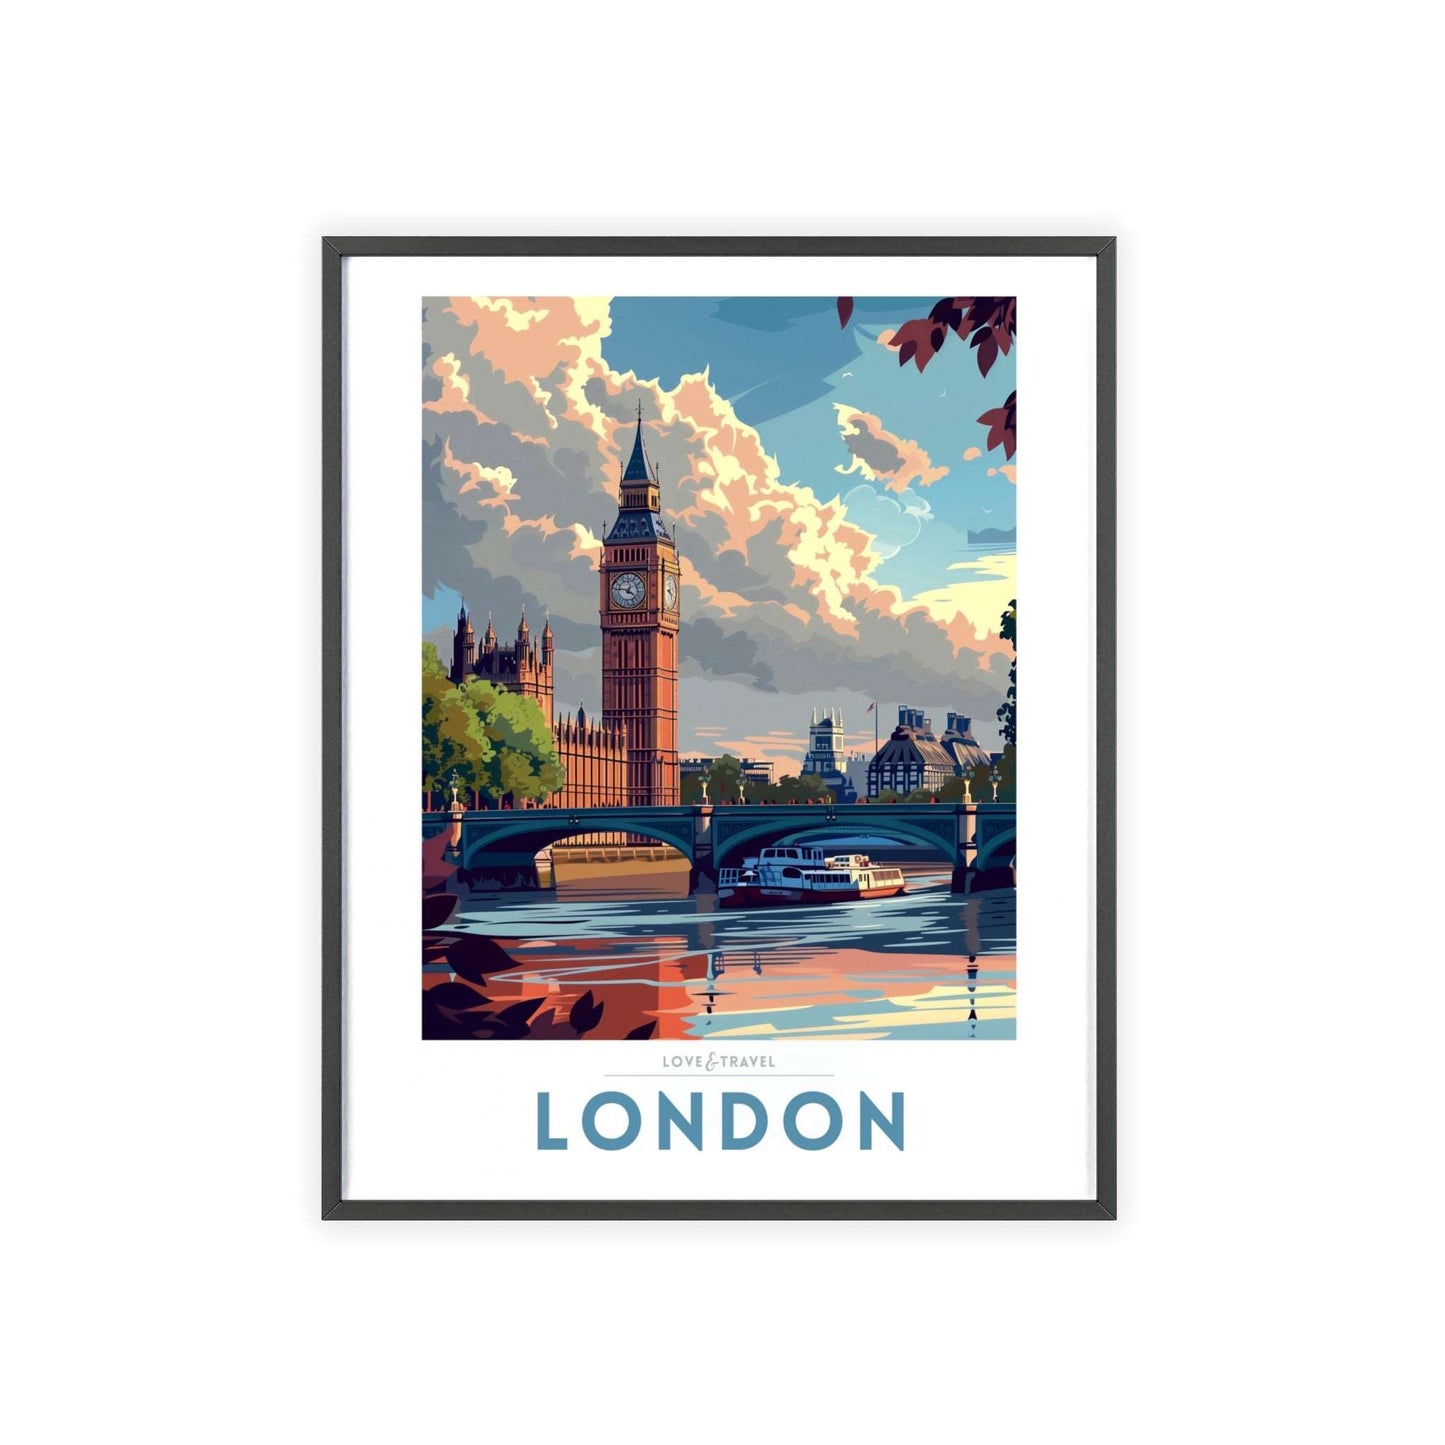 Elegant travel poster of London, showcasing iconic landmarks like Big Ben and the London Eye, perfect for adding a touch of nostalgia and sophistication to any home decor